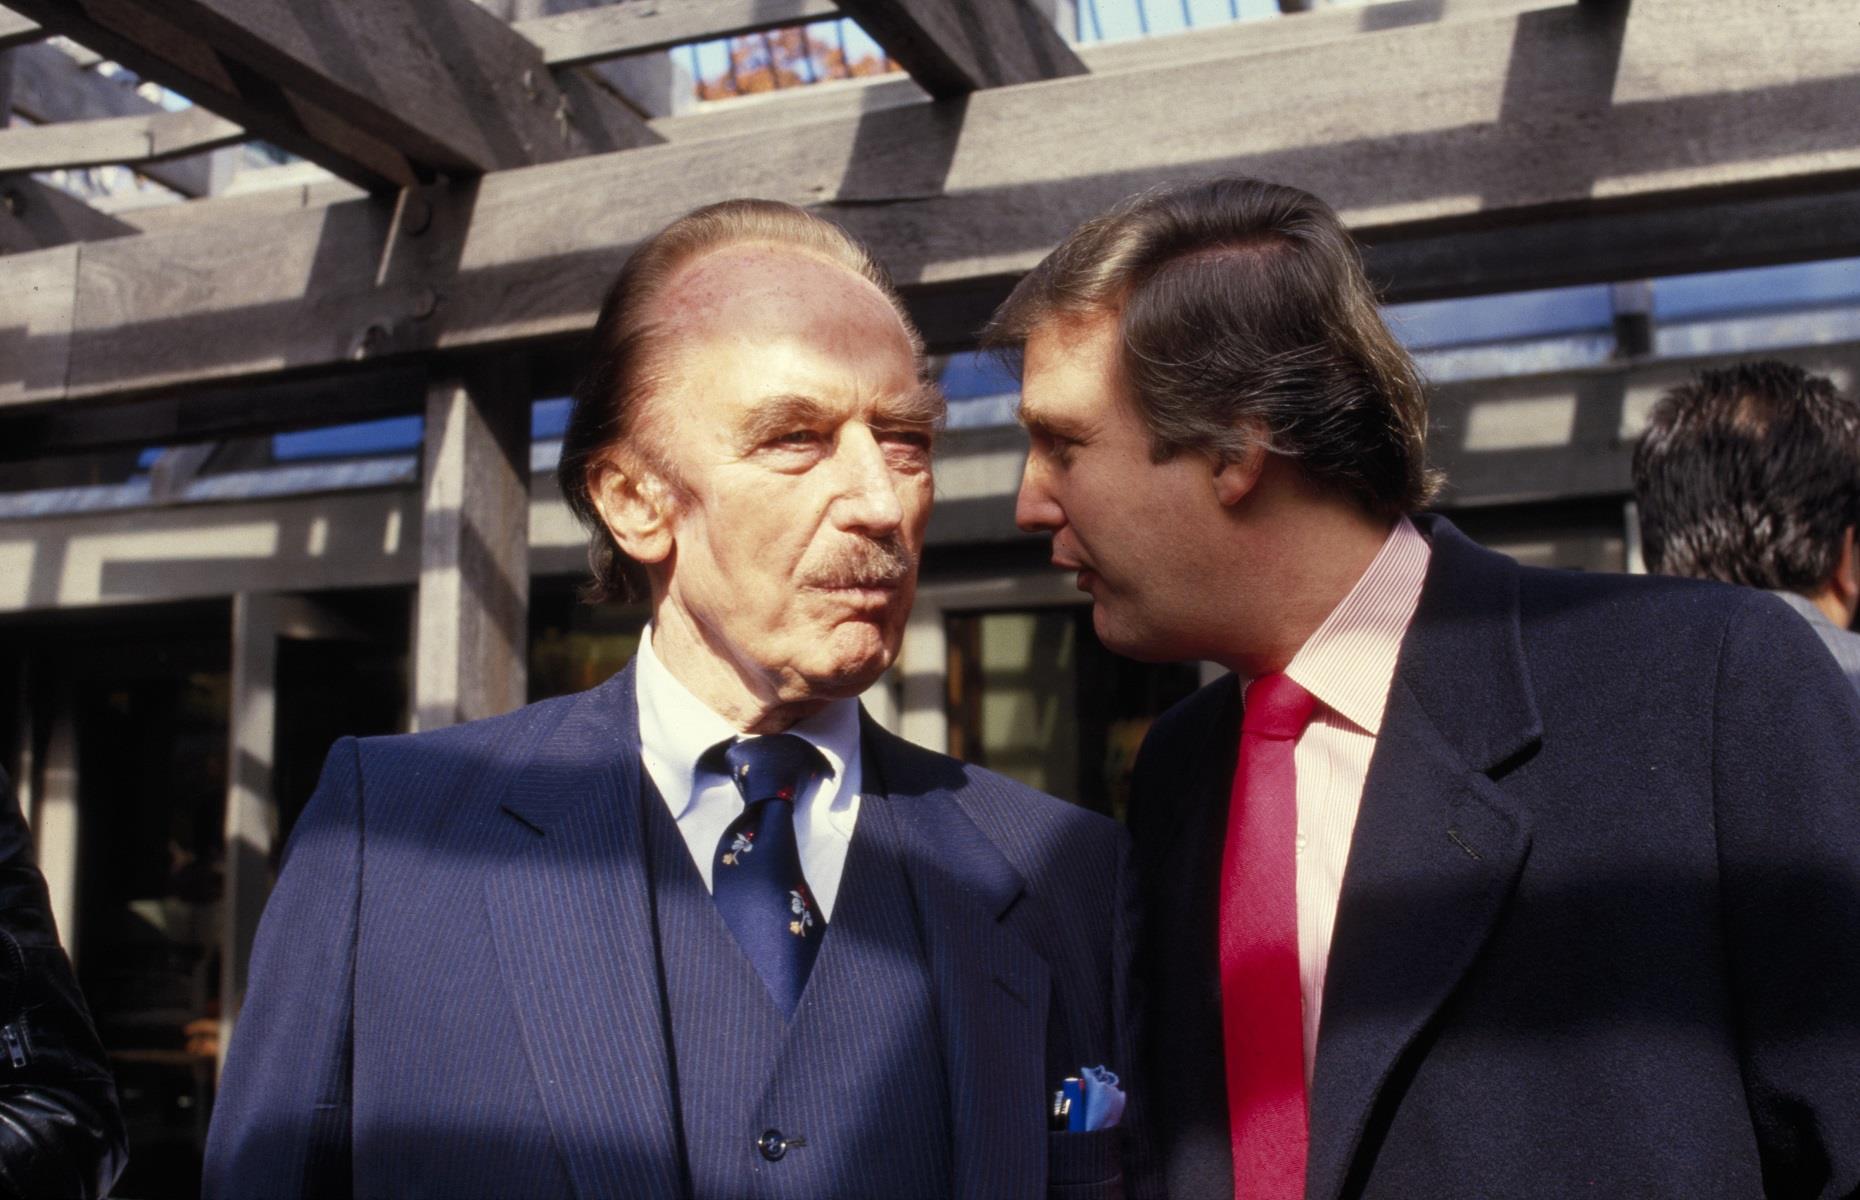 The inside story of Donald Trump's father